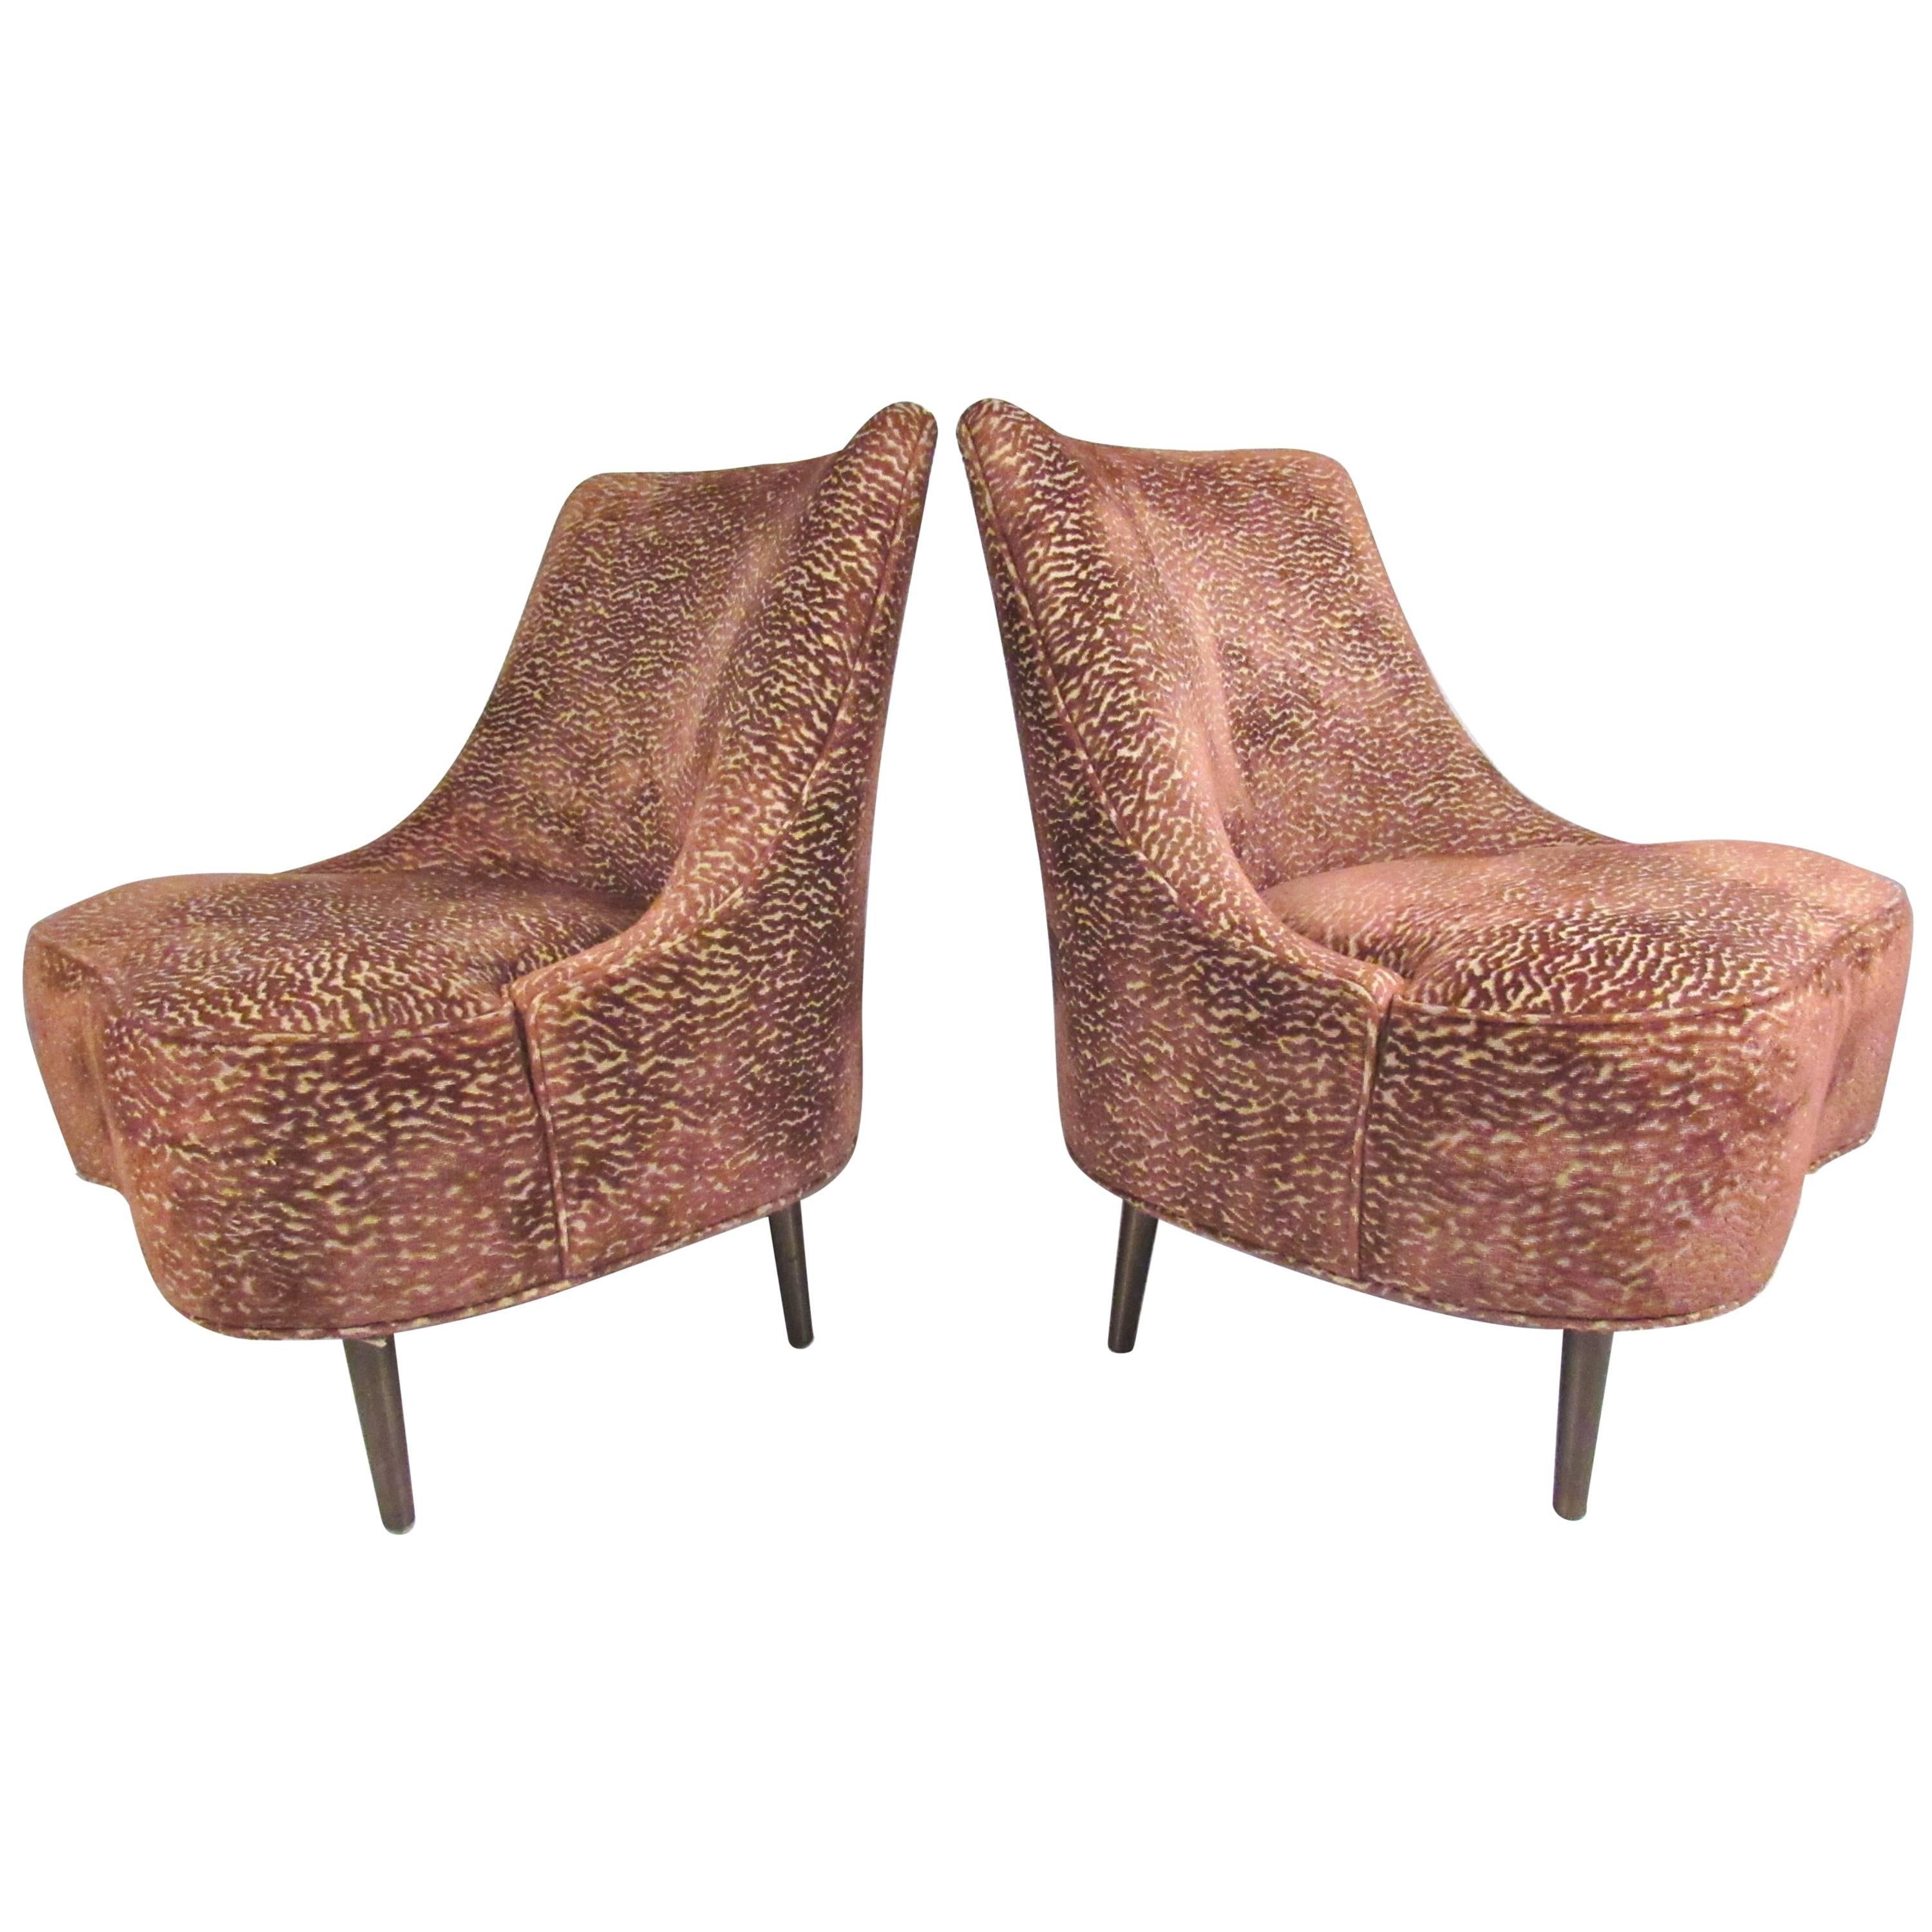 Pair of Vintage Dunbar Slipper Chairs by Edward Wormley